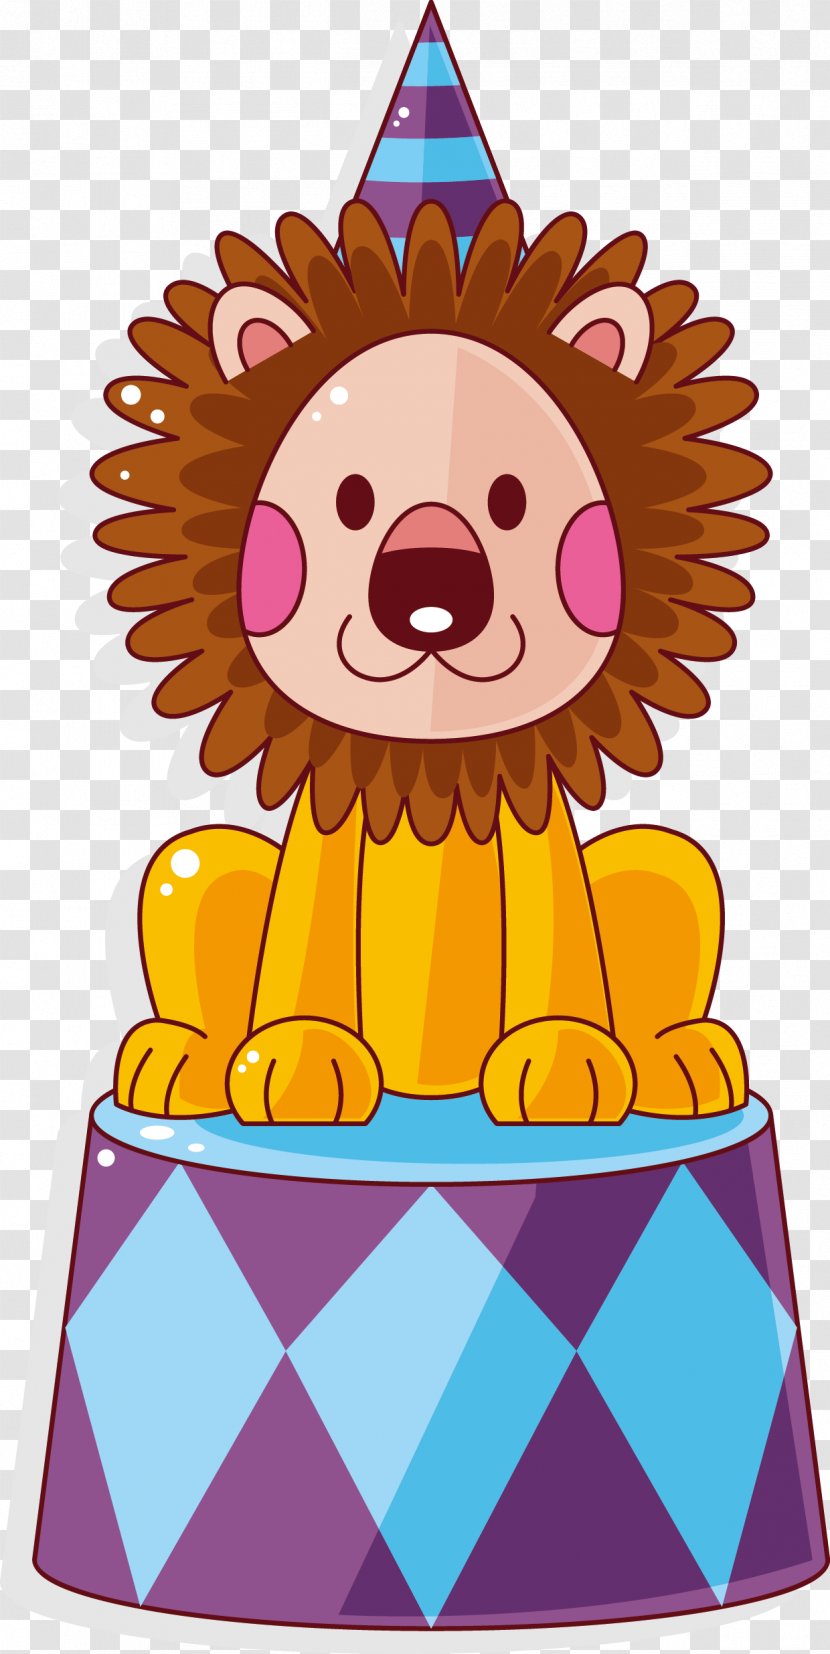 Hair Tie Comb Ring Afro-textured - Circus Lion Vector Transparent PNG